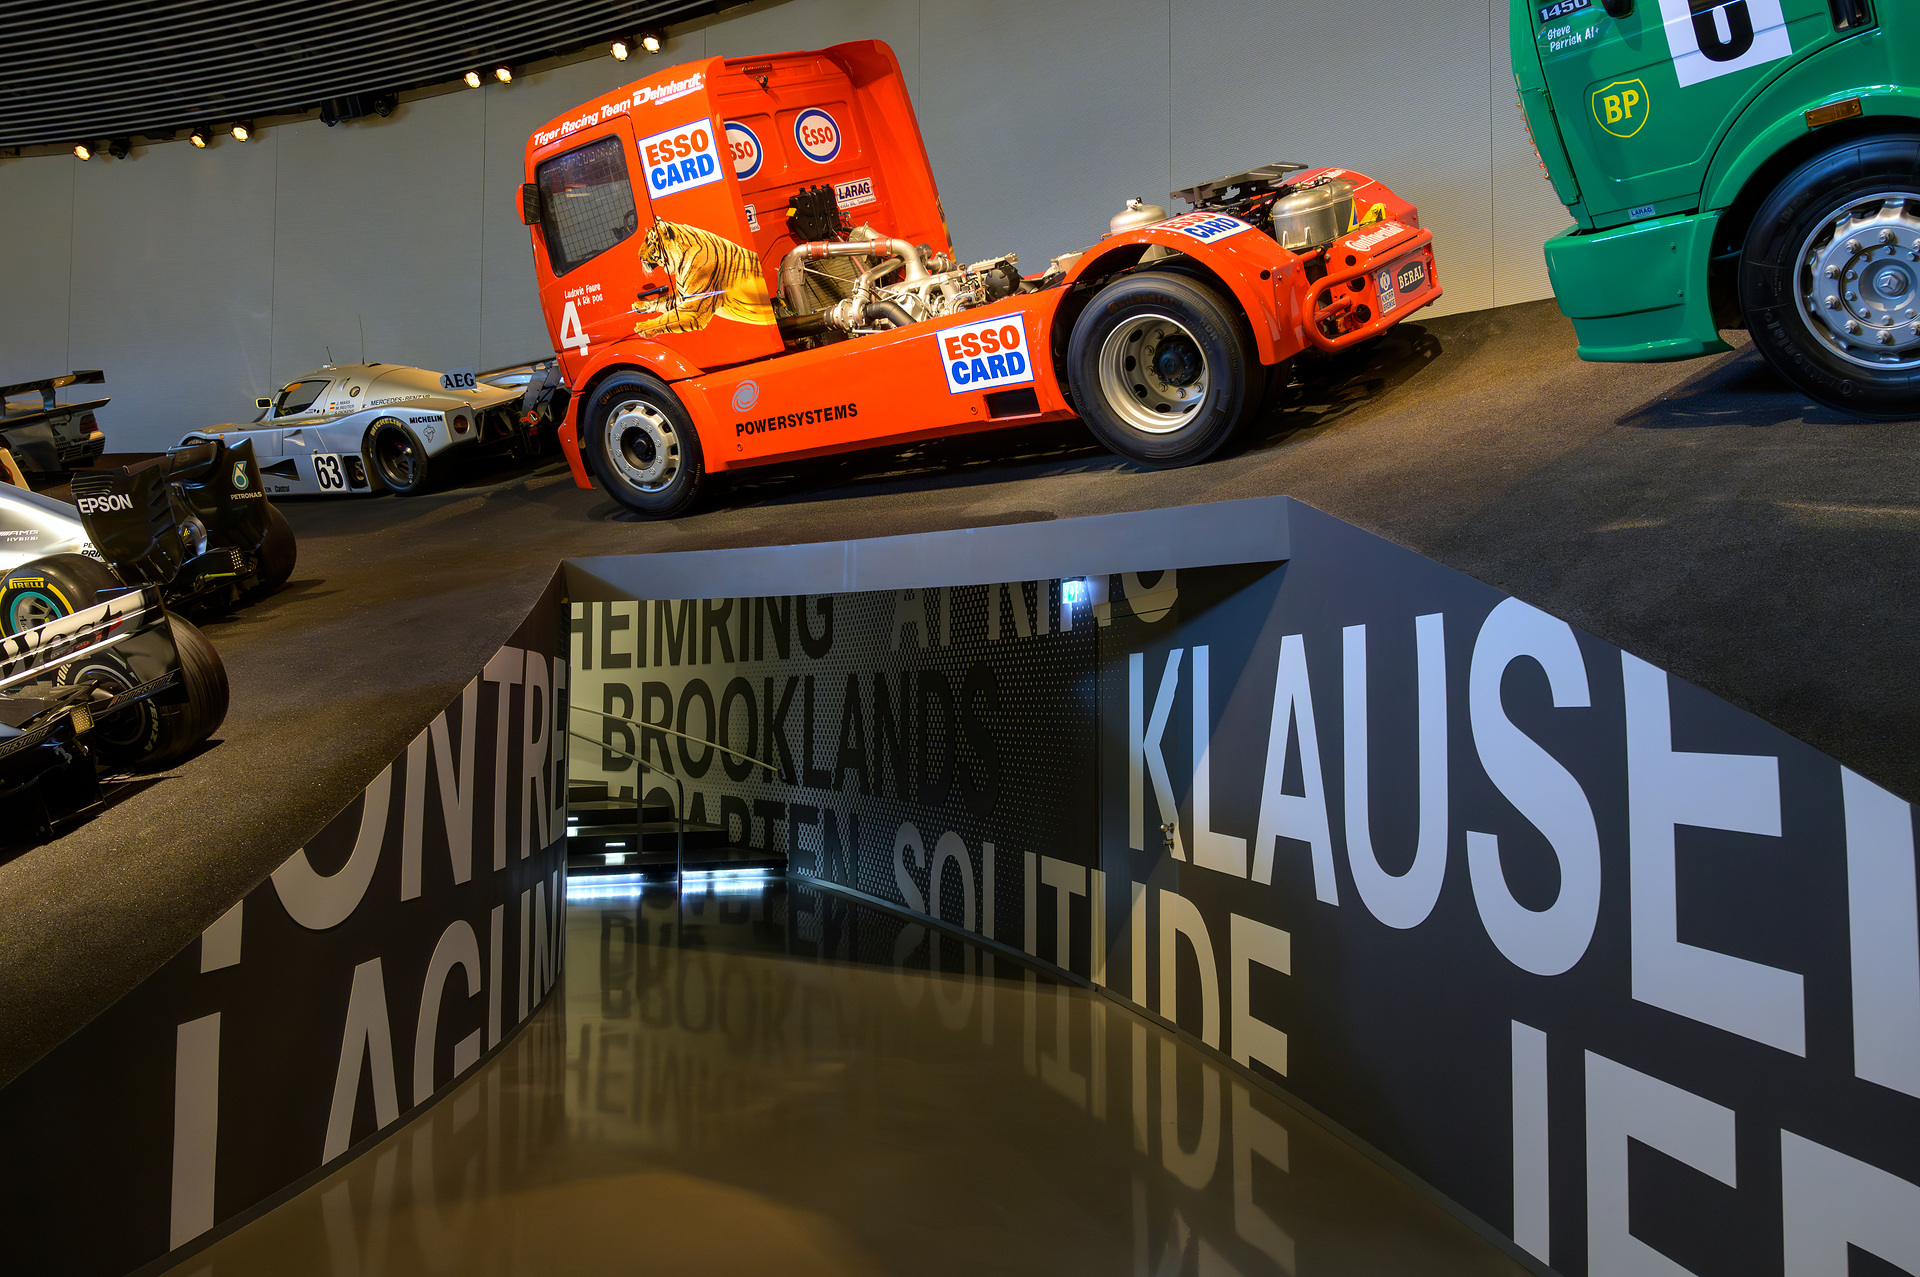 Five-tonne racing truck with 1,100 kW (1,496 hp) and 160 km/h